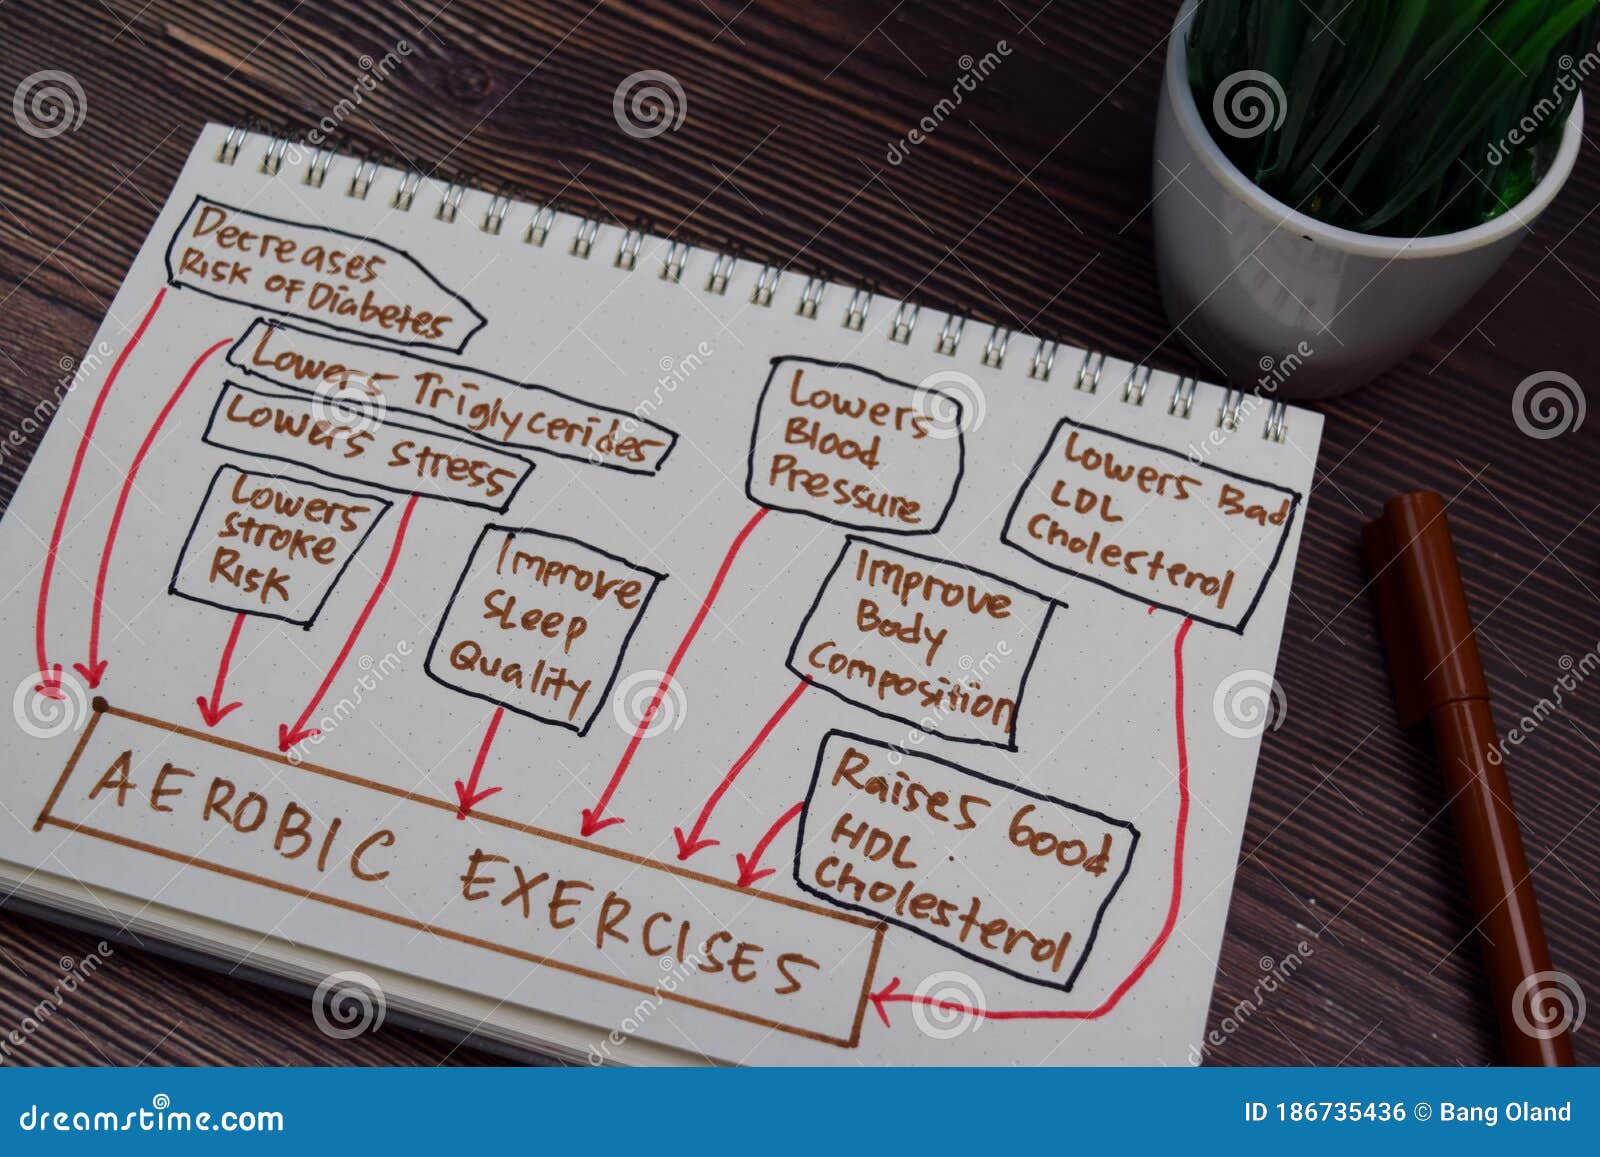 aerobic exercise write on a book with keywords  wooden table